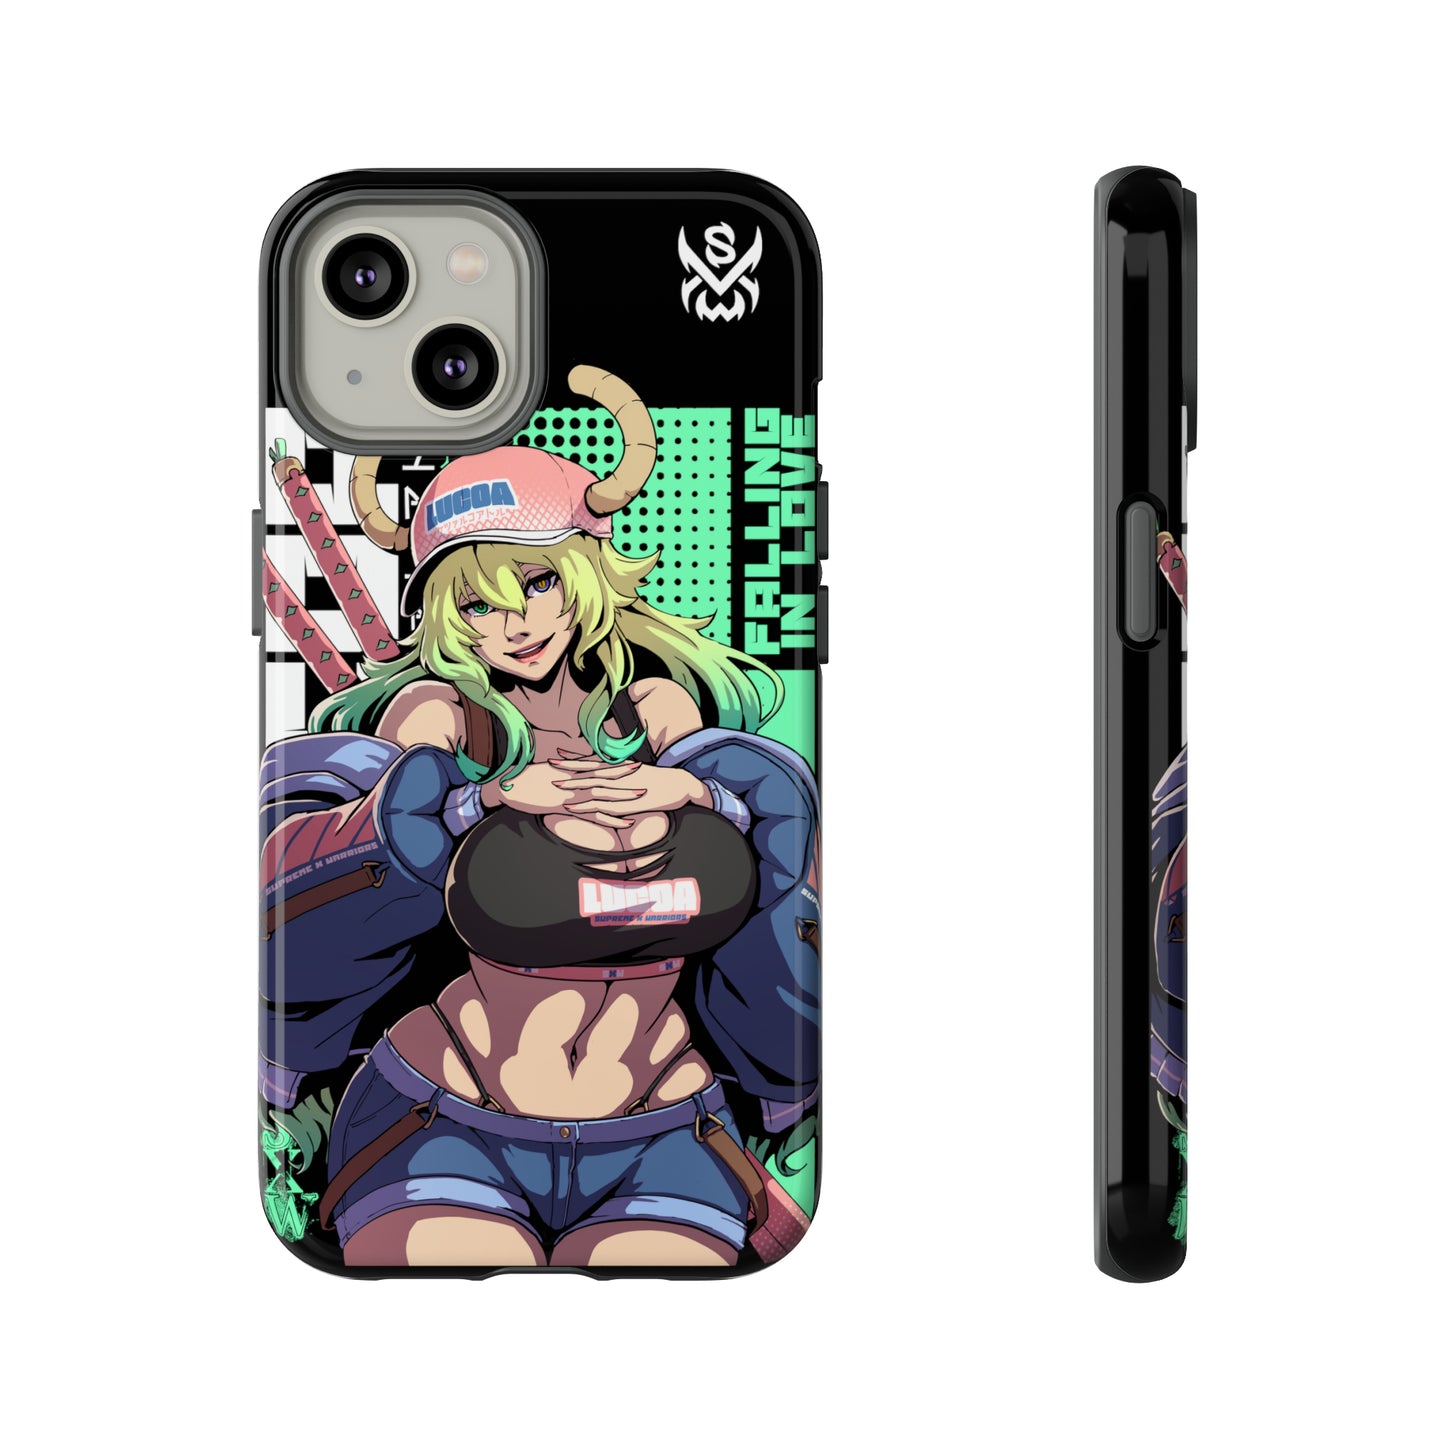 Divine / iPhone Cases - LIMITED